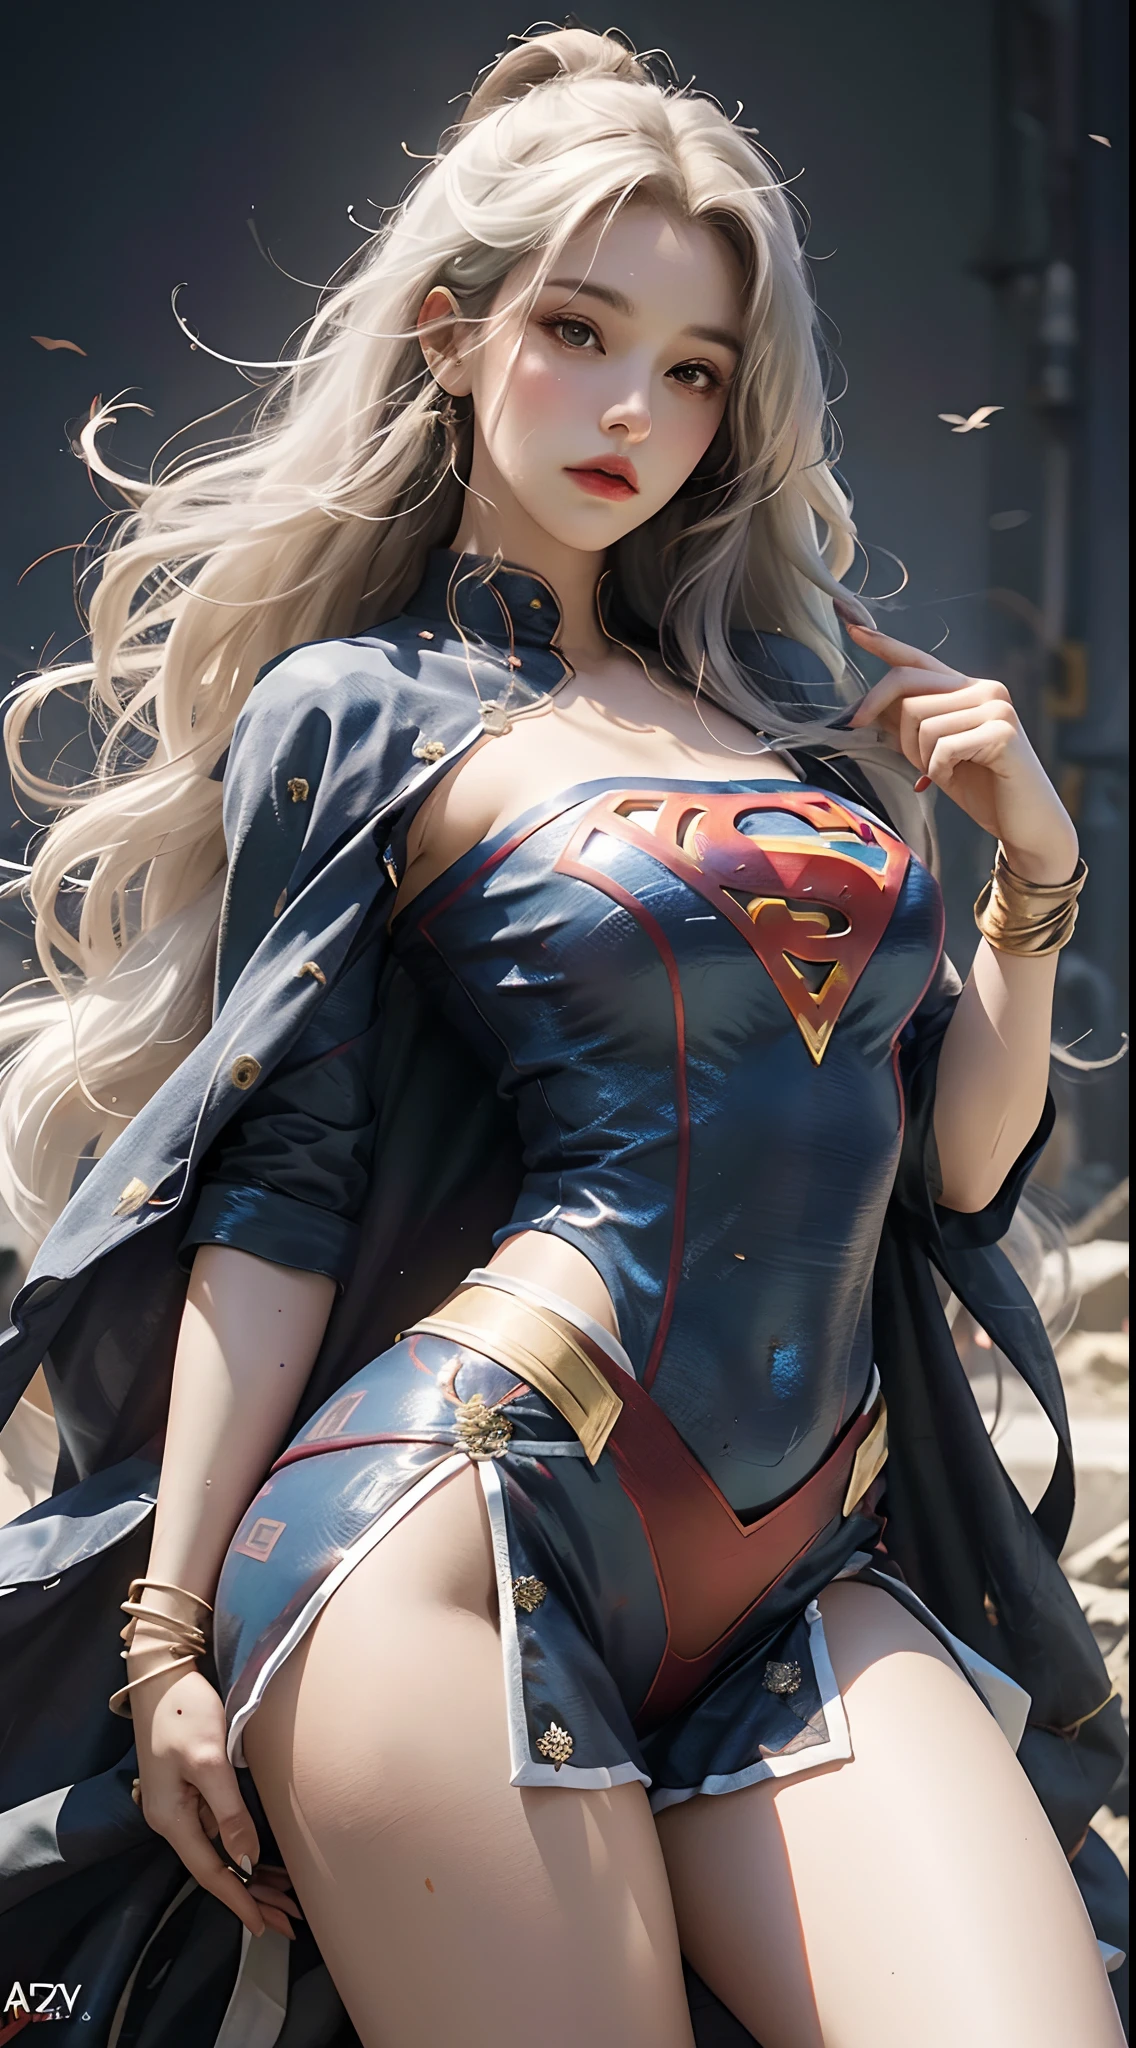 Full body portrait of a woman with white hair，Belle peinture de personnage，Guviz，Guviz-style artwork，Supergirl，Wearing a Superman uniform，Epic and beautiful character art，Stunning character art，Guvitz at the Pixiv Art Station，Bigchest，Leakage of exposed milk，Bare lower body，Camel toes，Protruding underparts，Pornographic leaks，nakeness